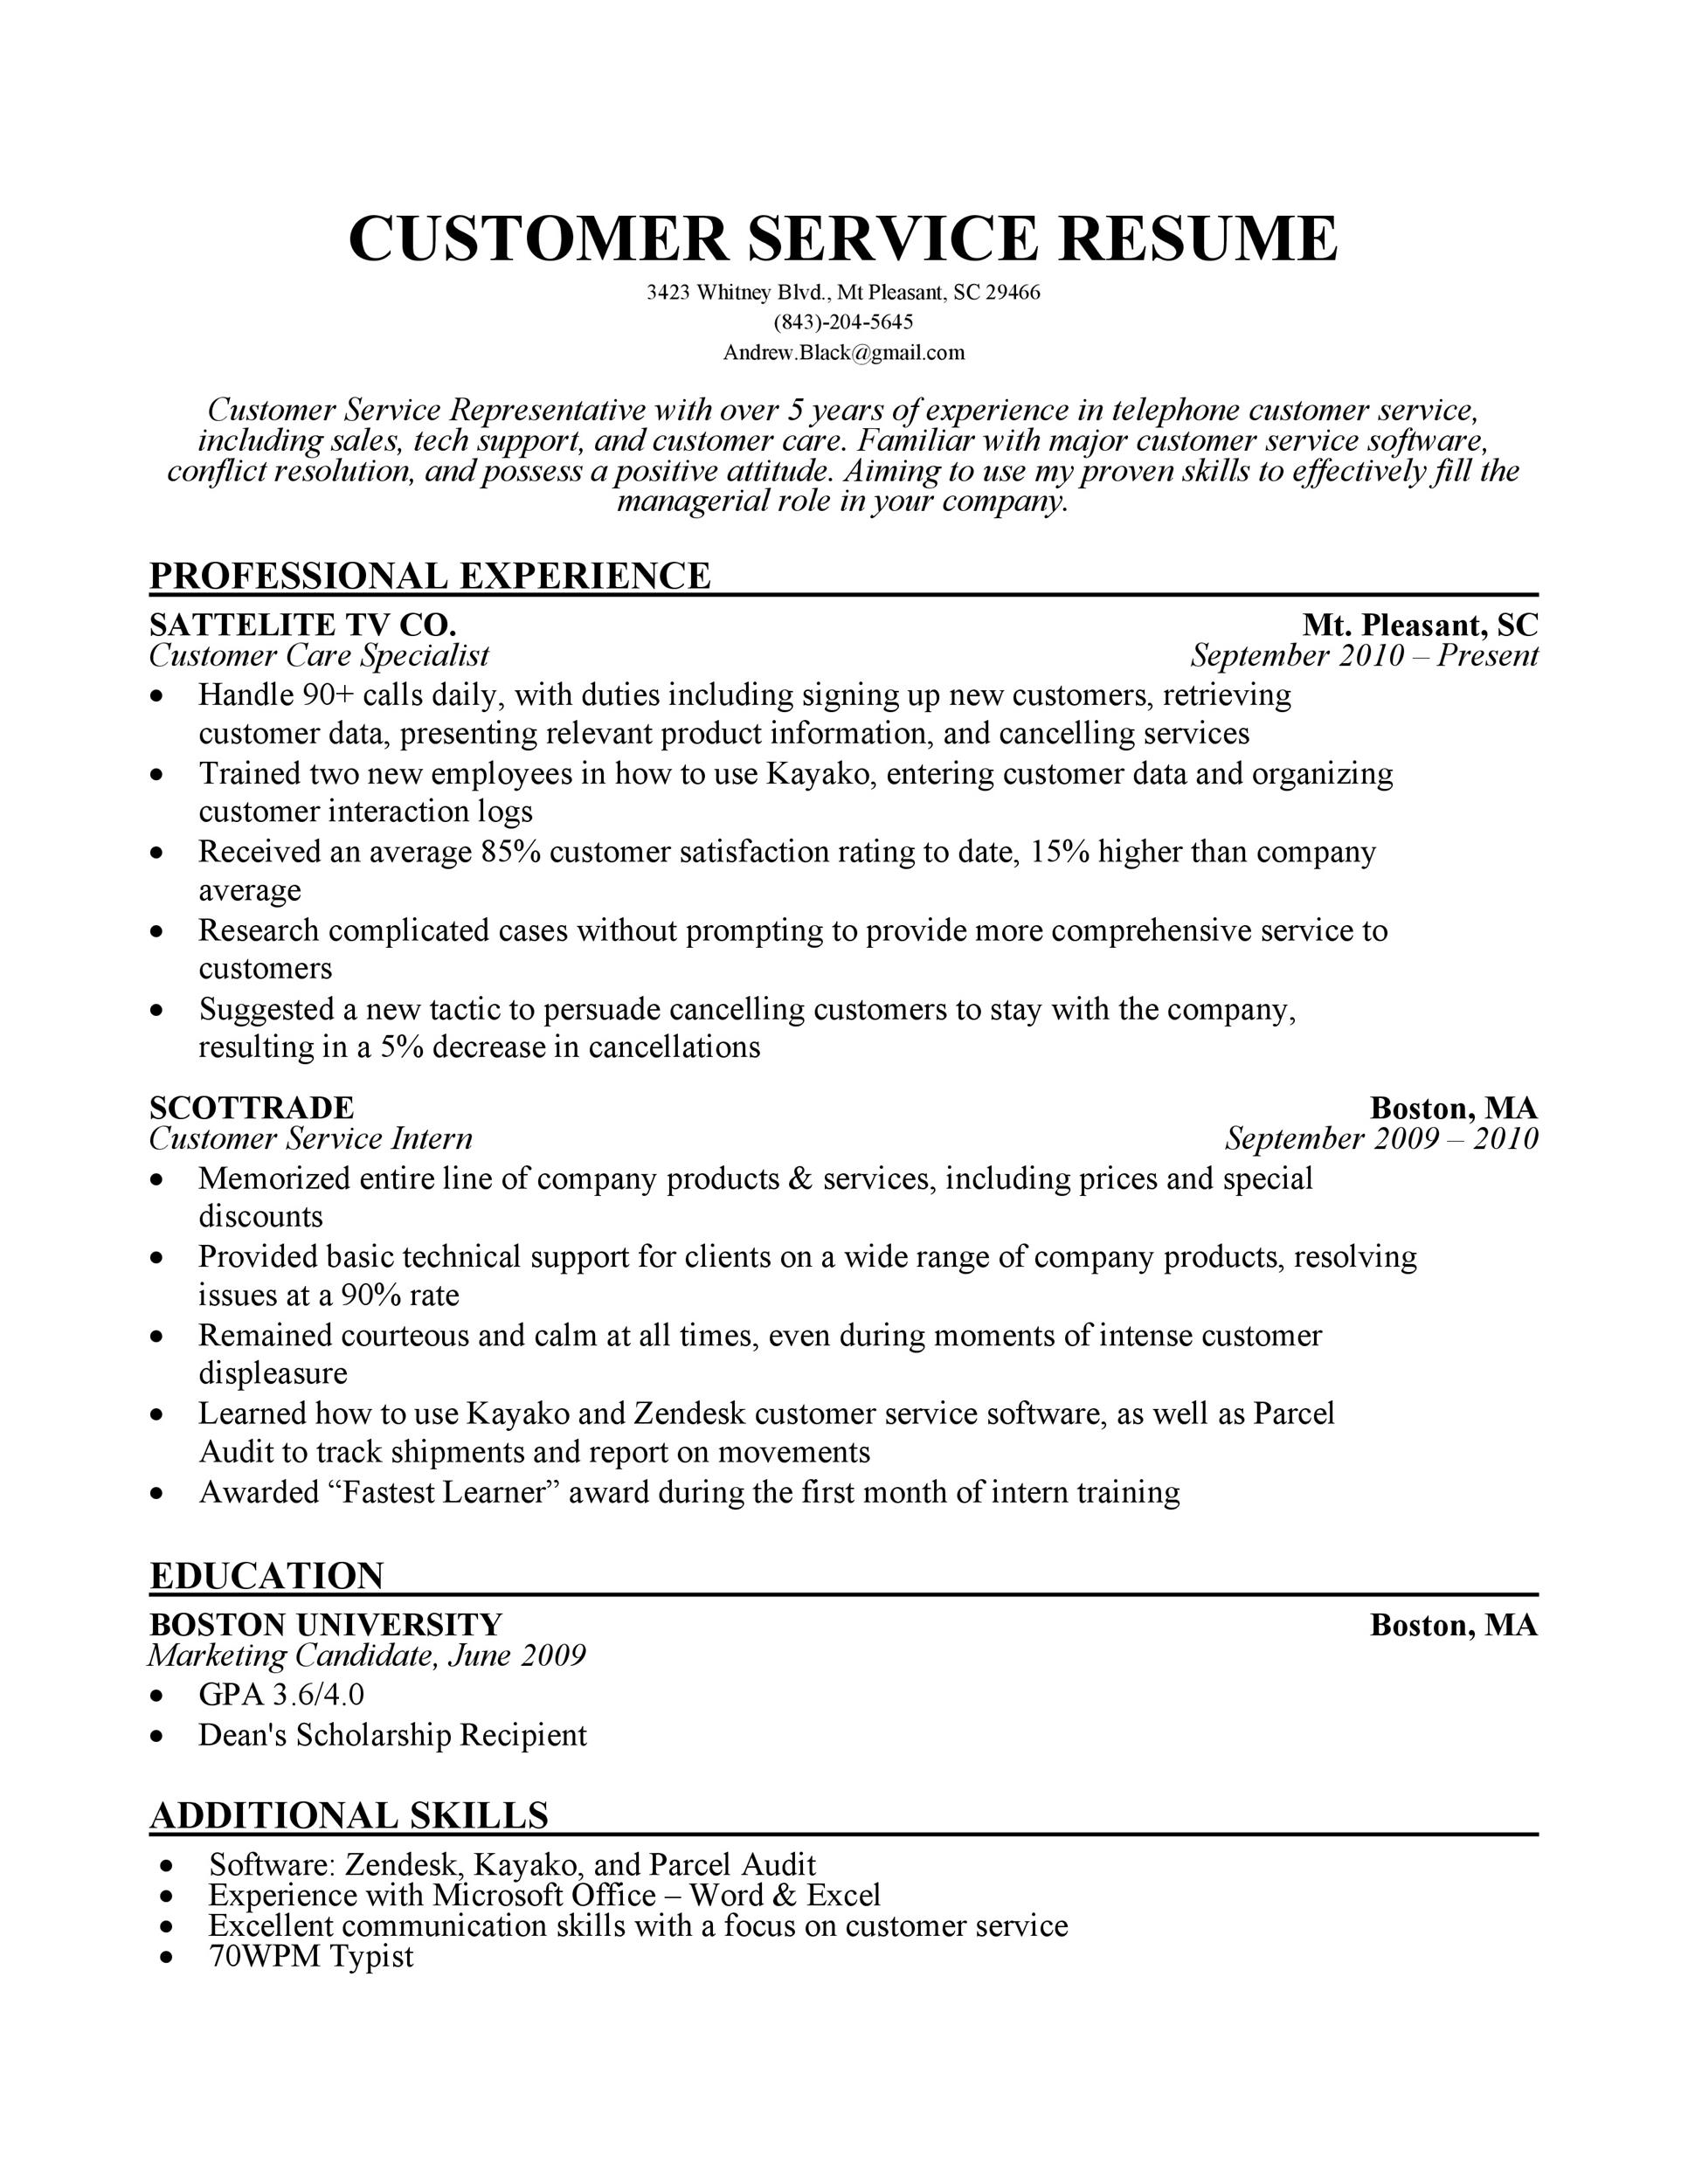 resume format as accountant   64